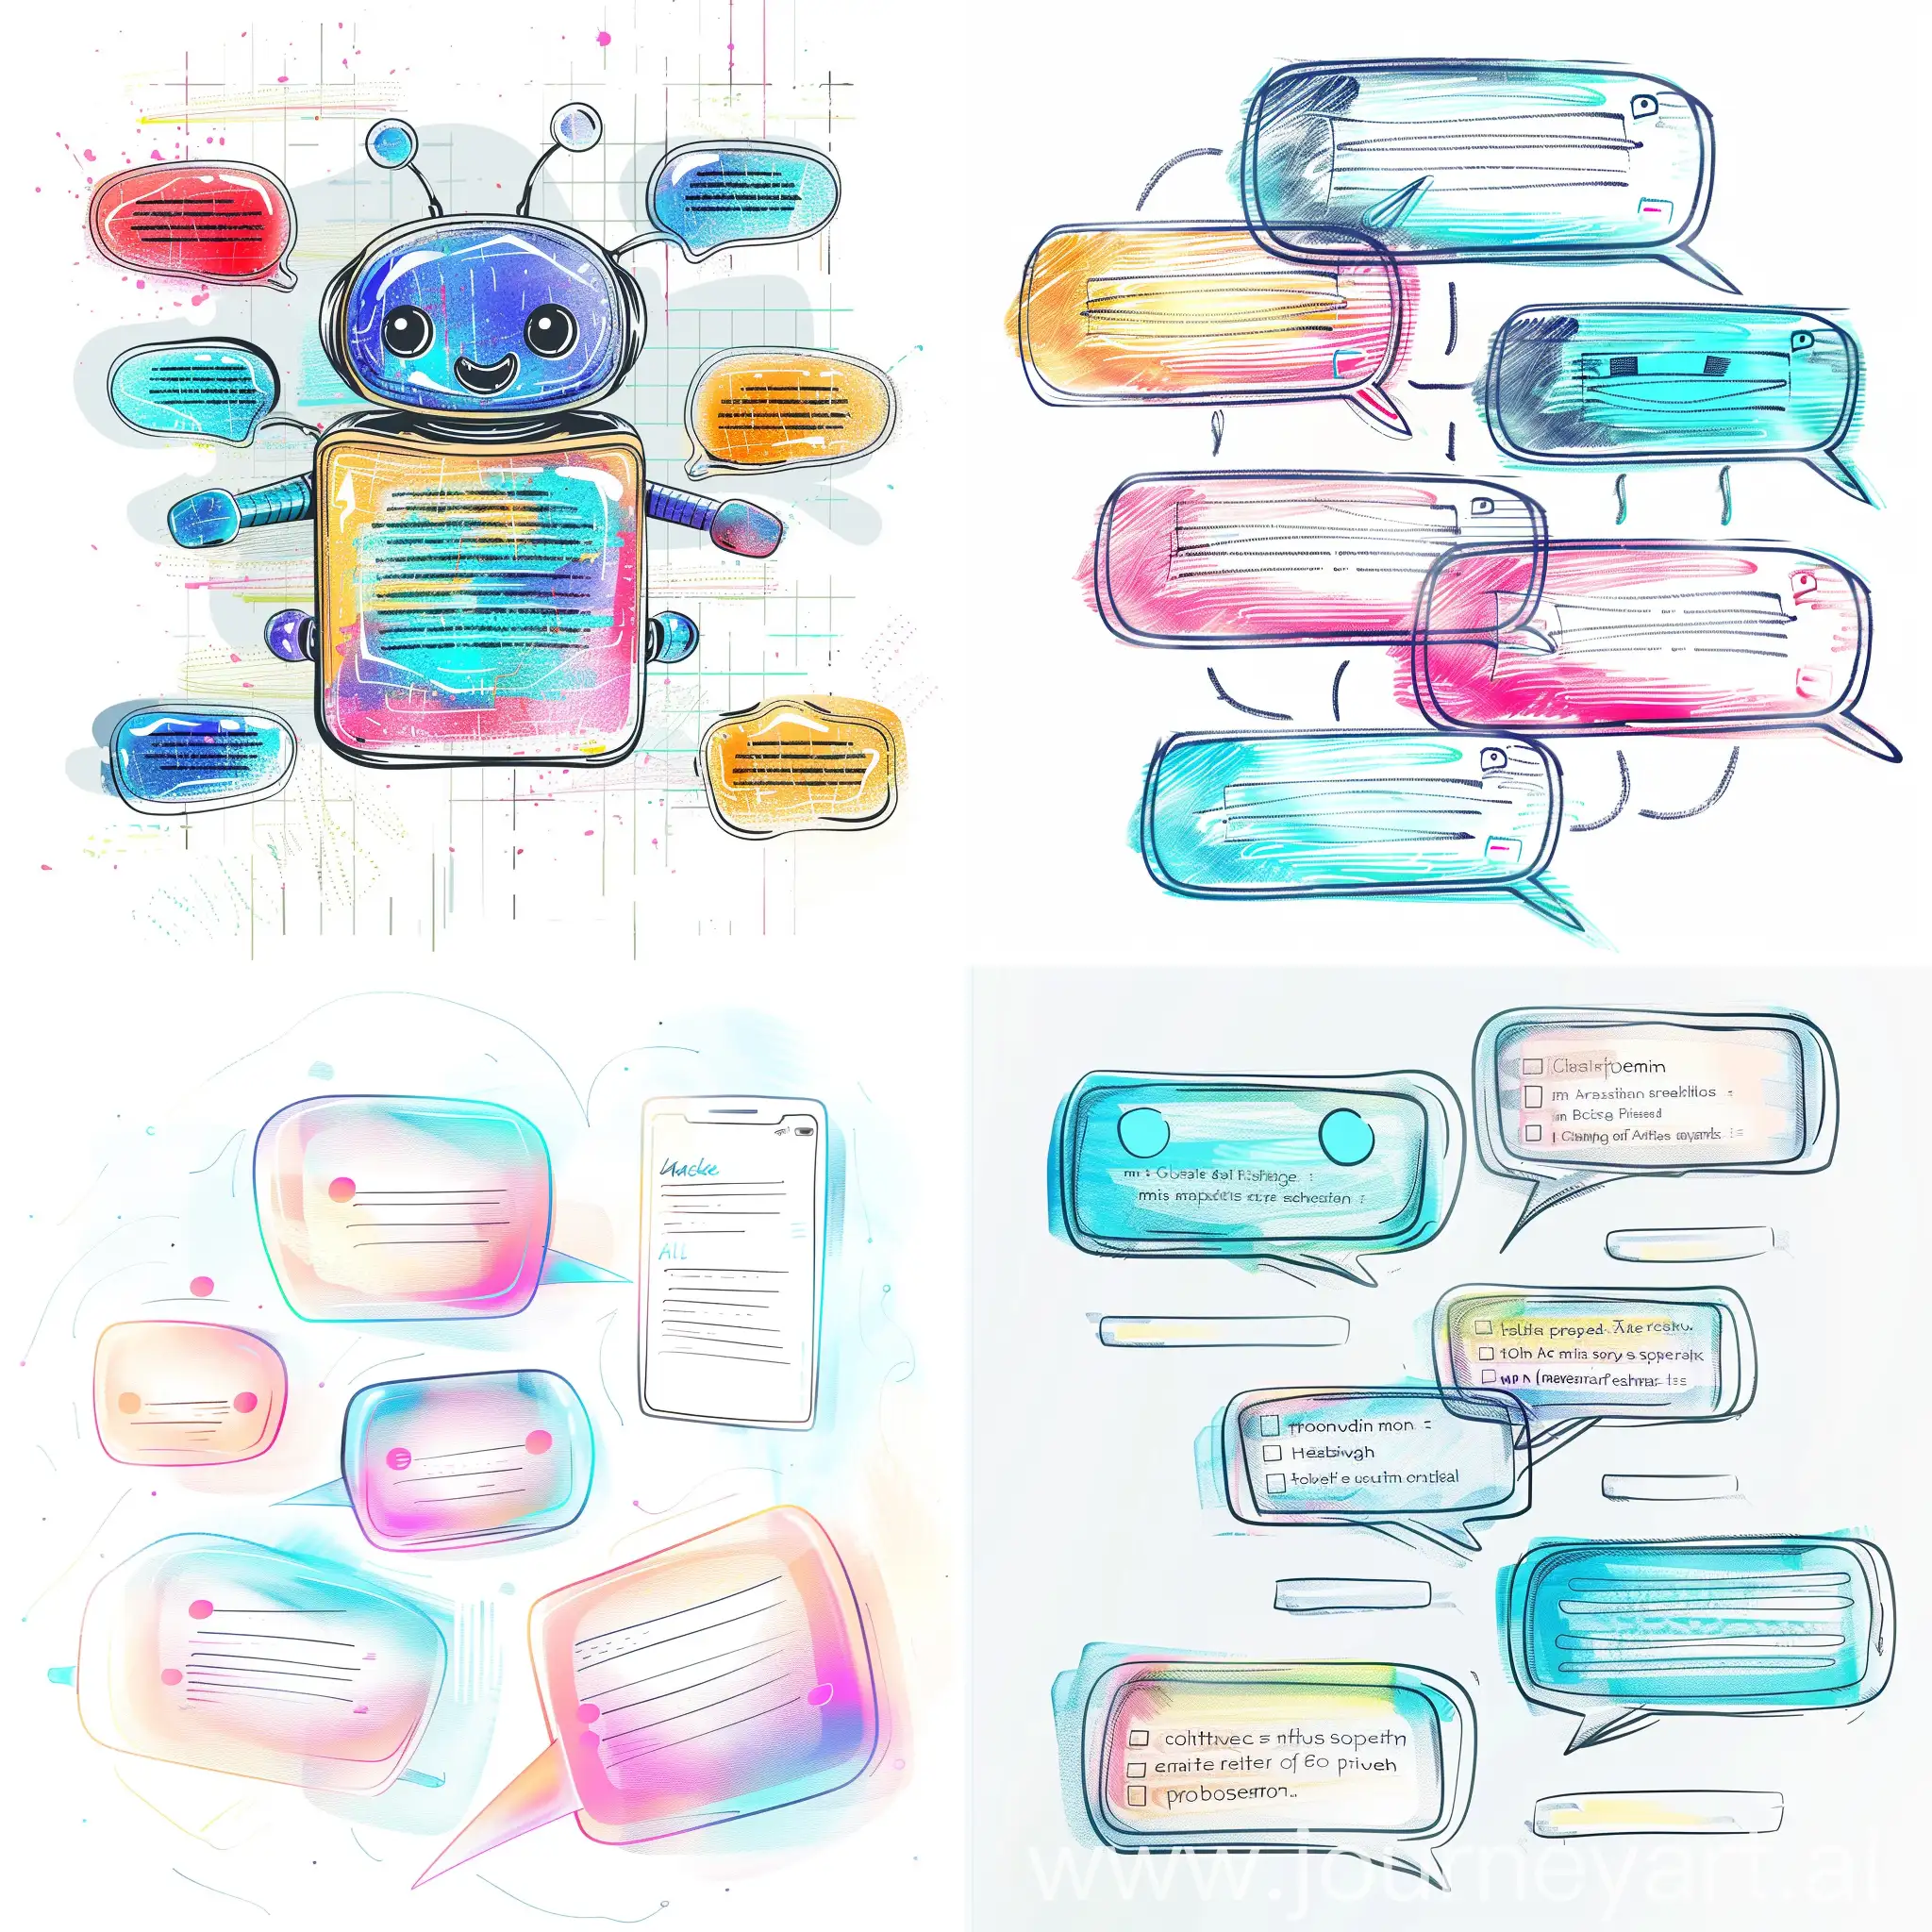 Chatbot application messaging app window, bubbles with text indicating a conversation, color pencil sketch style 